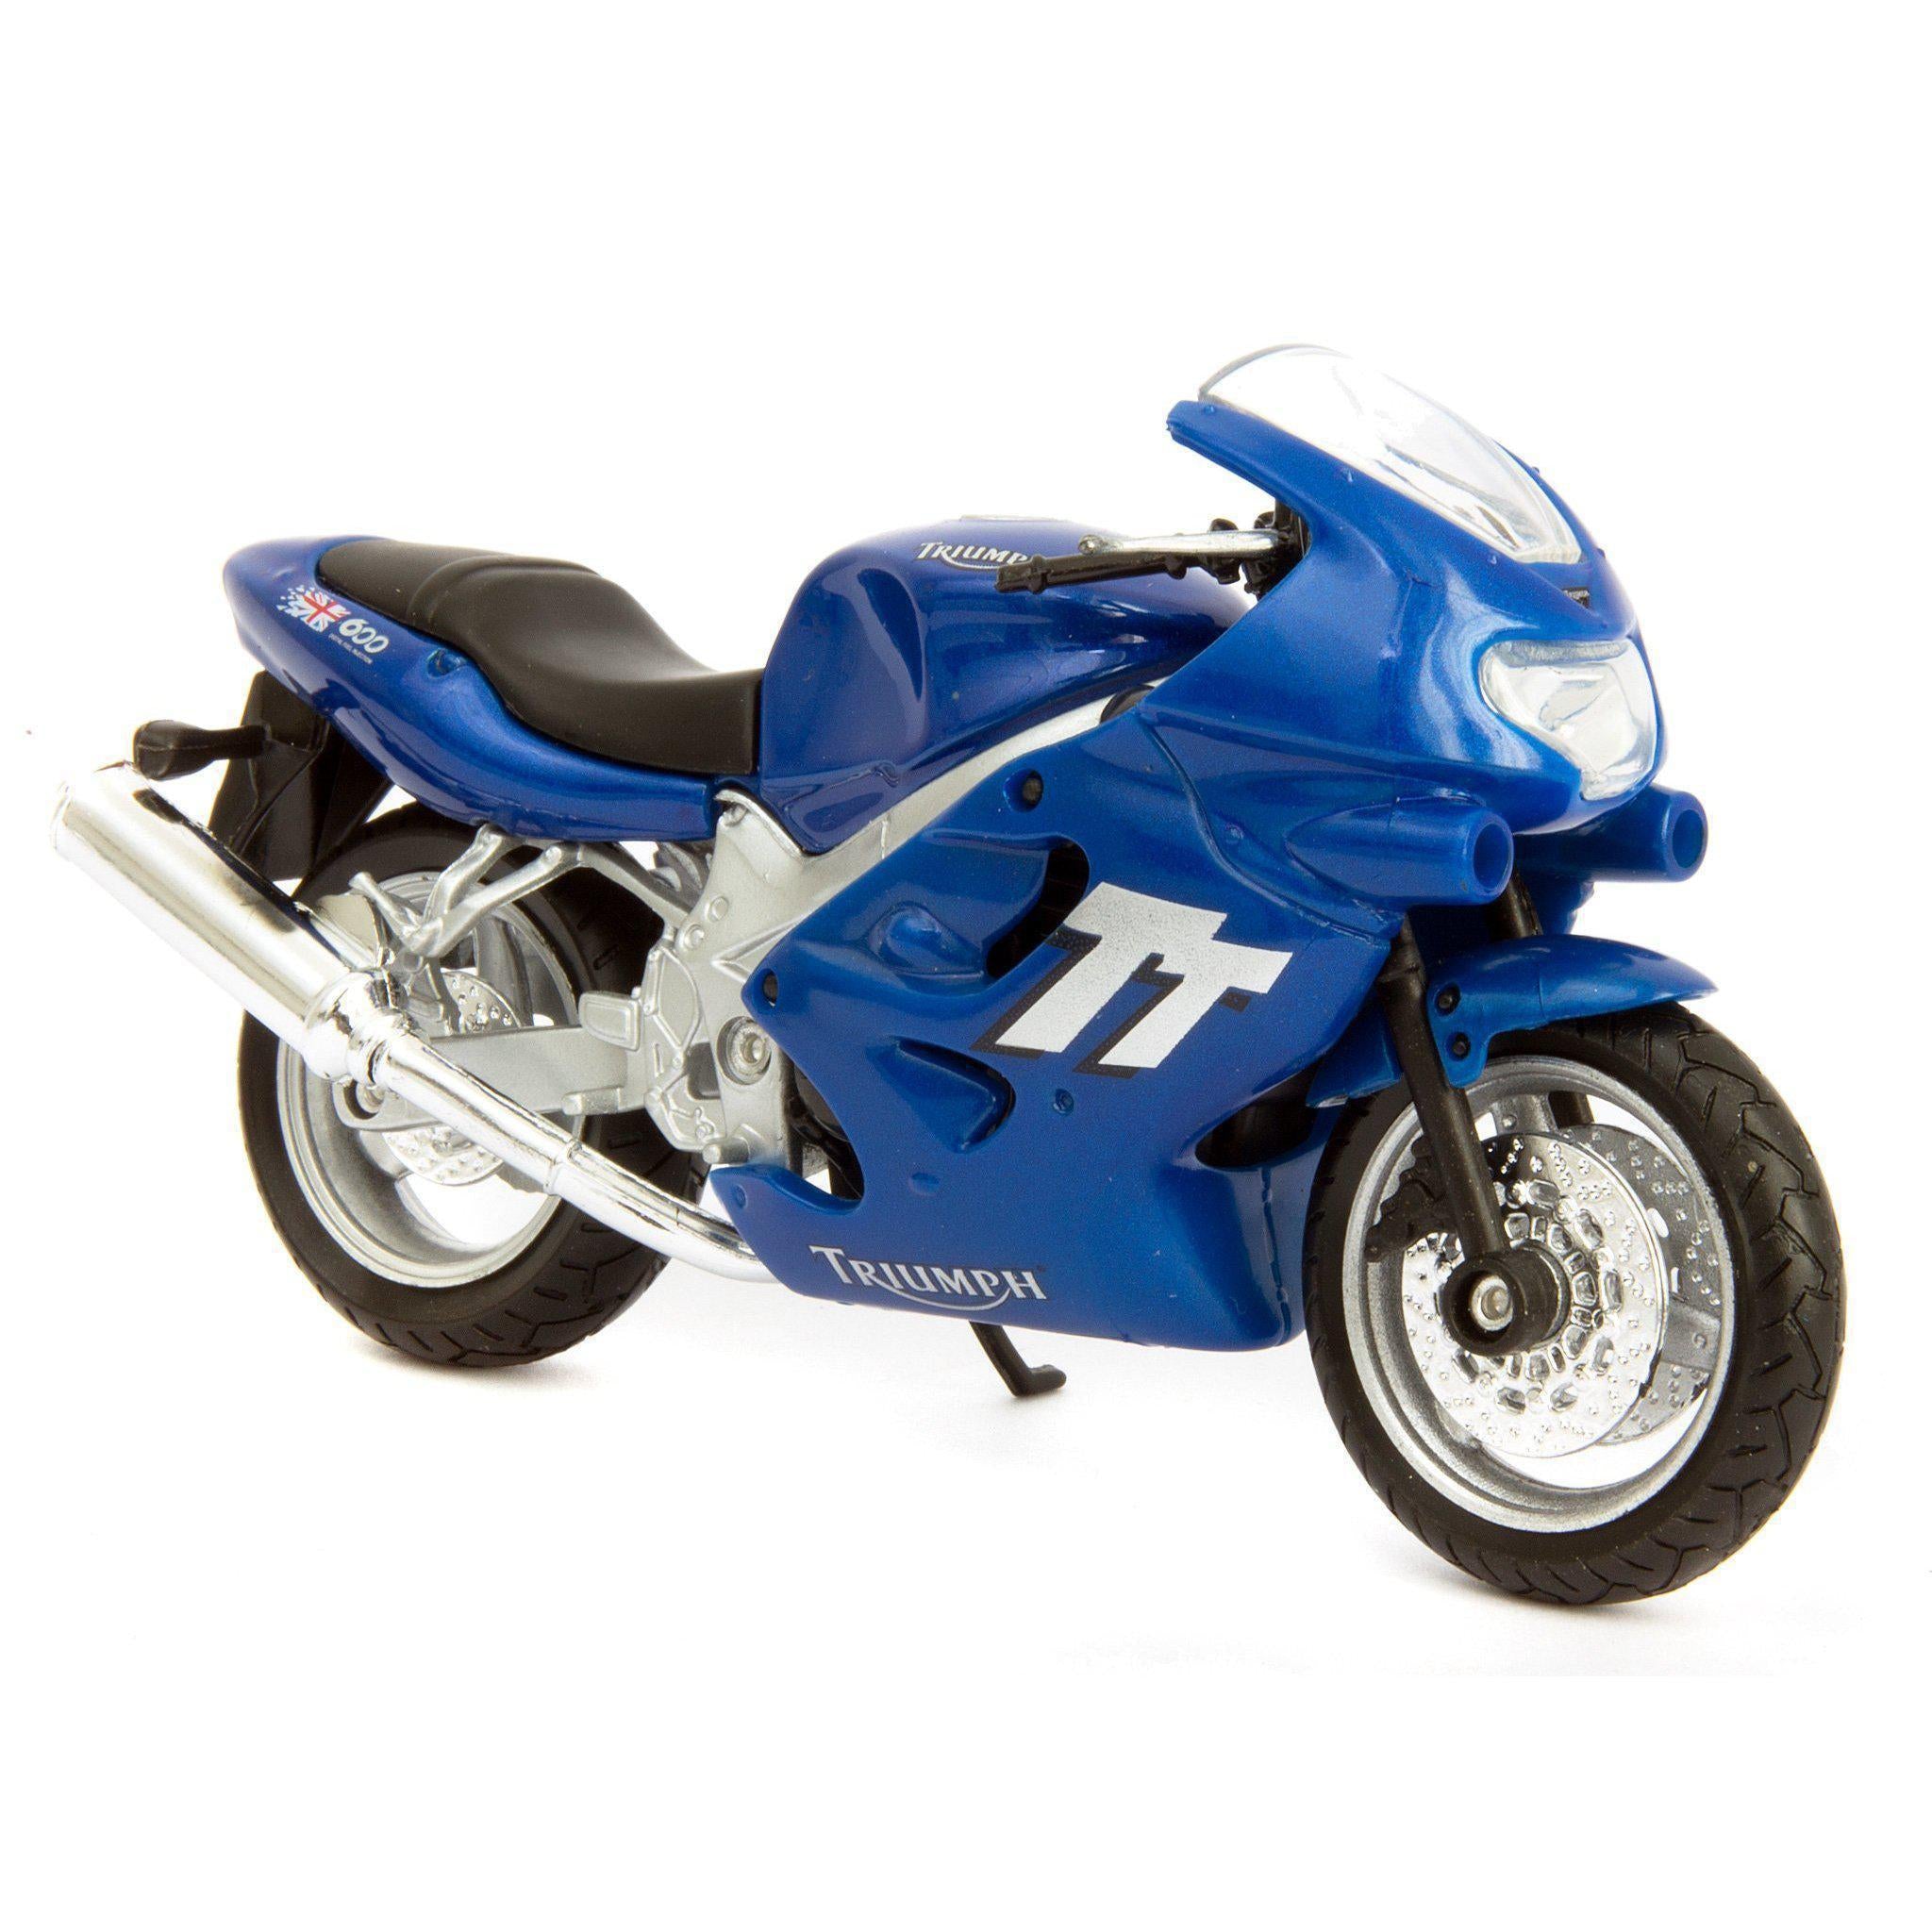 Triumph TT600 Diecast Model Motorcycle 2002 - 1:18 Scale-Welly-Diecast Model Centre